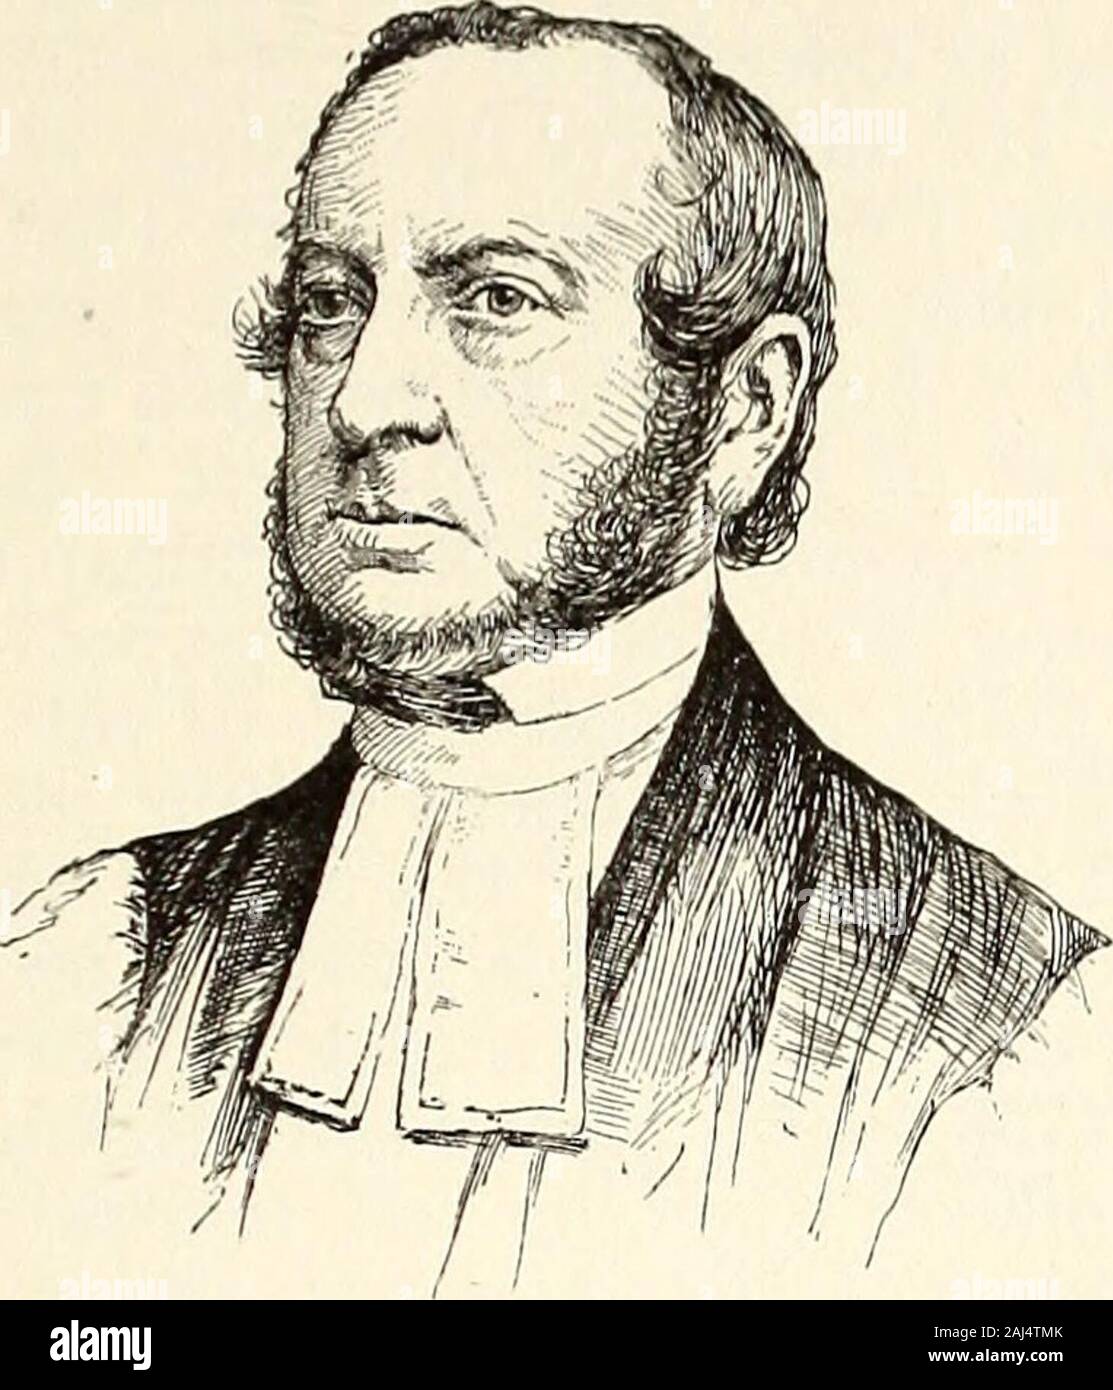 Appletons' cyclopædia of American biography . f Pennsylvania, and was annually re-elected till 1830, when he declined further re-elec-tion. In the same year (1823) he was chosen secre-tary to the house of bishops, and re-elected bythem to the office in 1826. In 1827 he was calledto St. Thomass church, New York, the wardenscoming to Philadelphia to deliver the call in per-son. But he deemed it his duty to remain wherehe was. In the same year, though not quite thirtyyears of age, Mr. De Lancey was unanimouslyelected provost of the University of Pennsylvania,which had somewhat declined. At the re Stock Photo